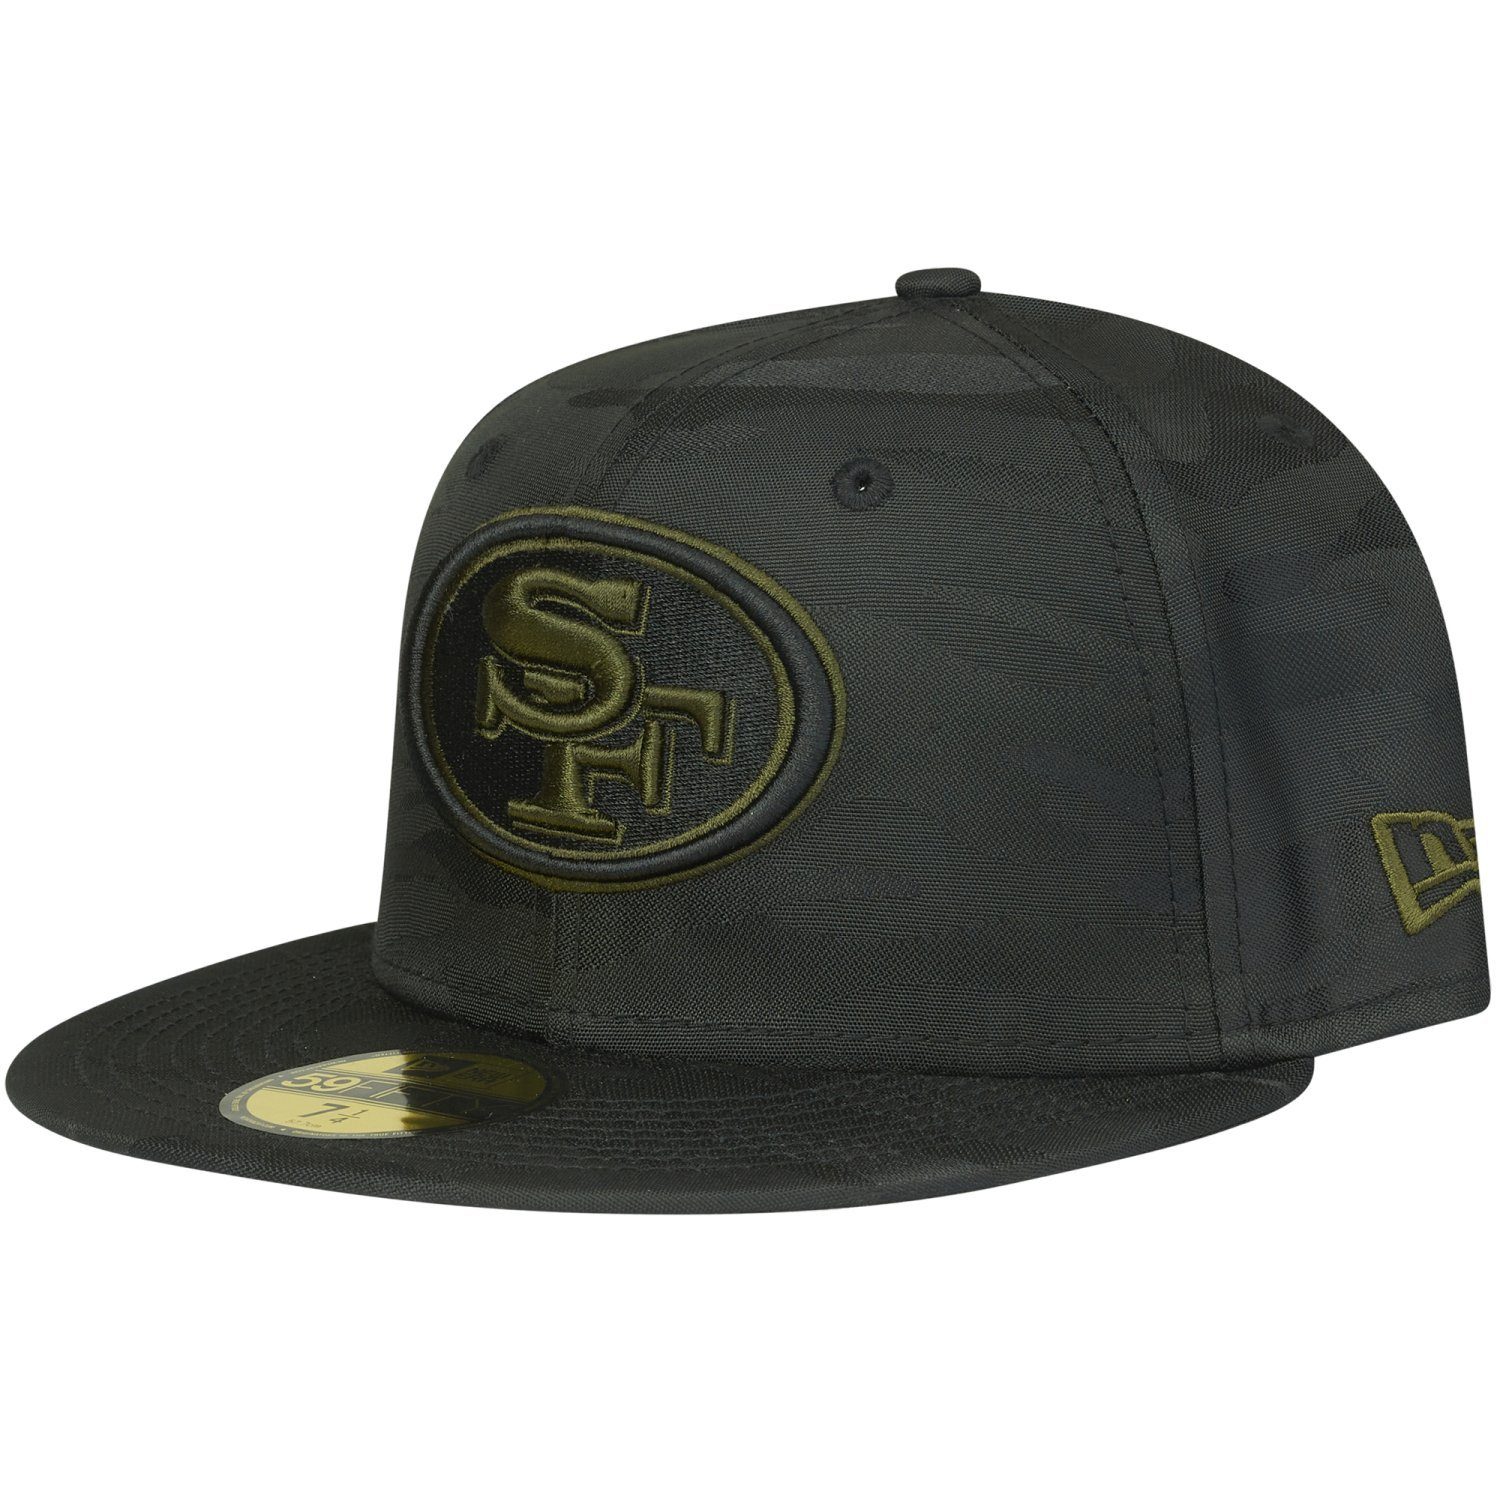 Fitted New TEAMS alpine NFL Era 59Fifty San Francisco 49ers Cap